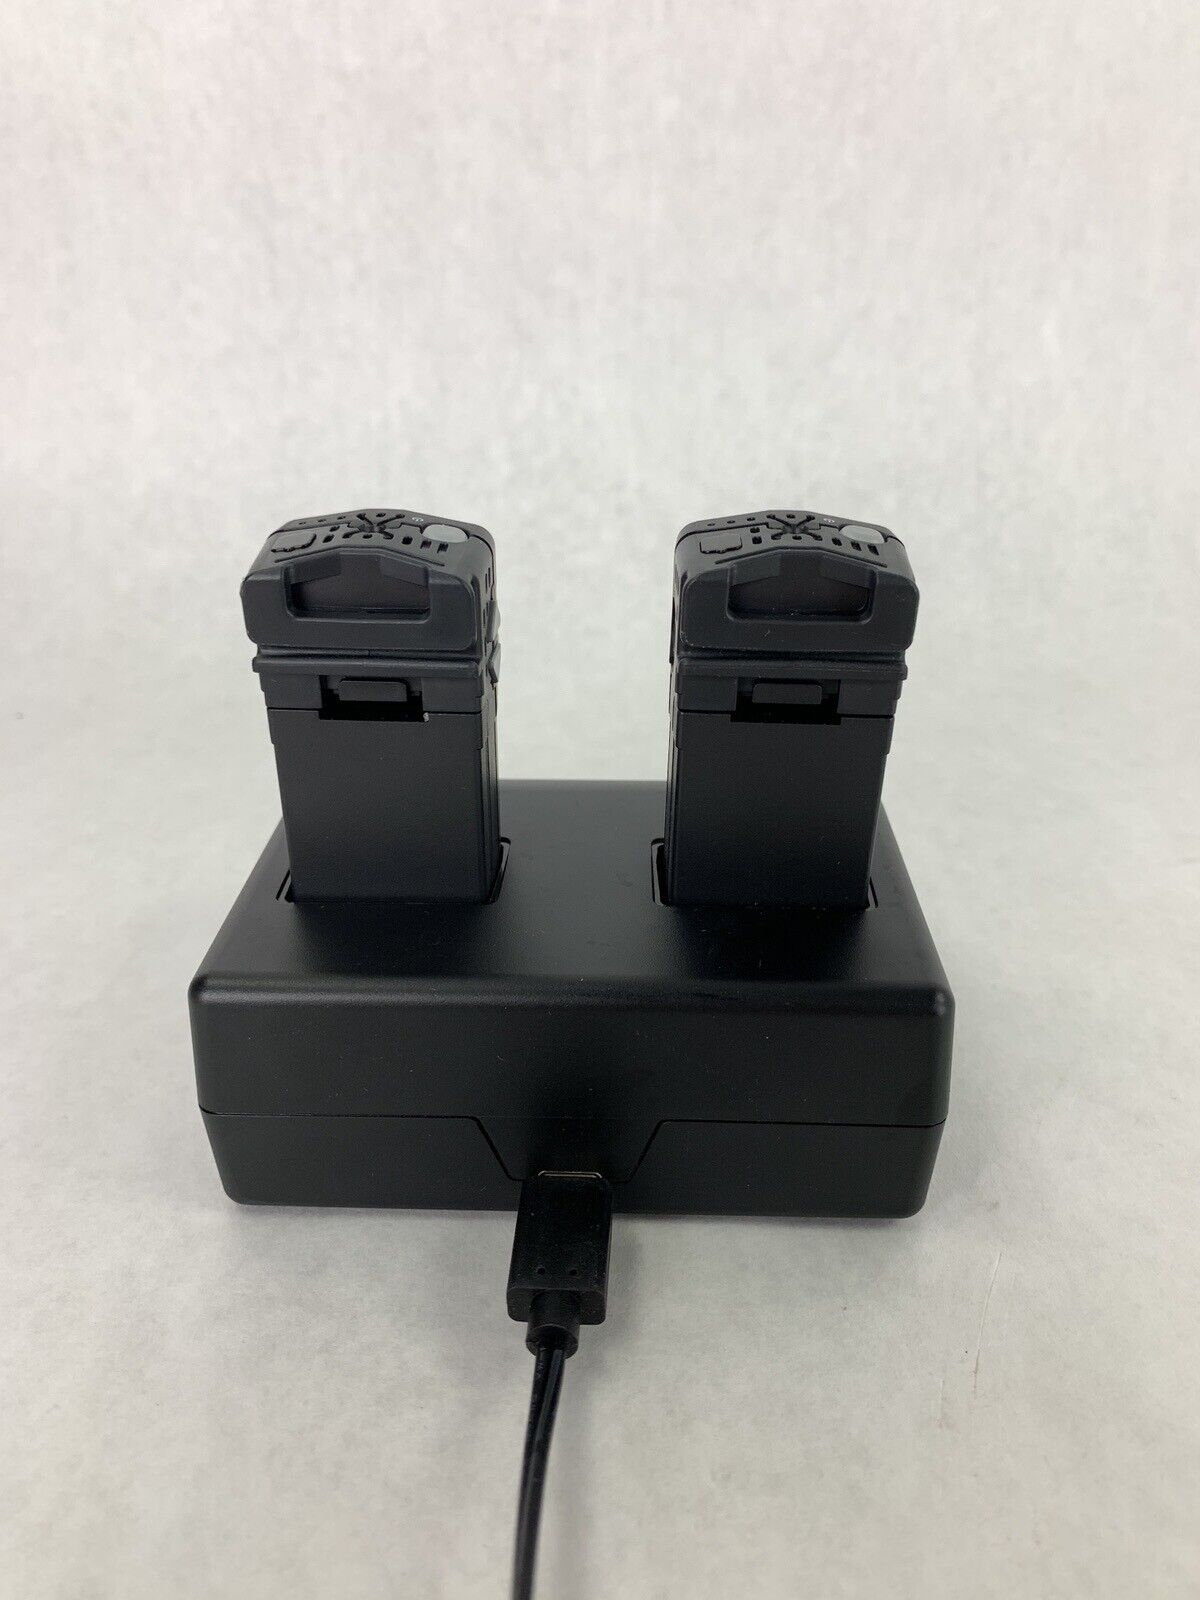 Pair of LightSpeed FlexMike Microphones FMN w/ FSC Charging Dock and AC adapter